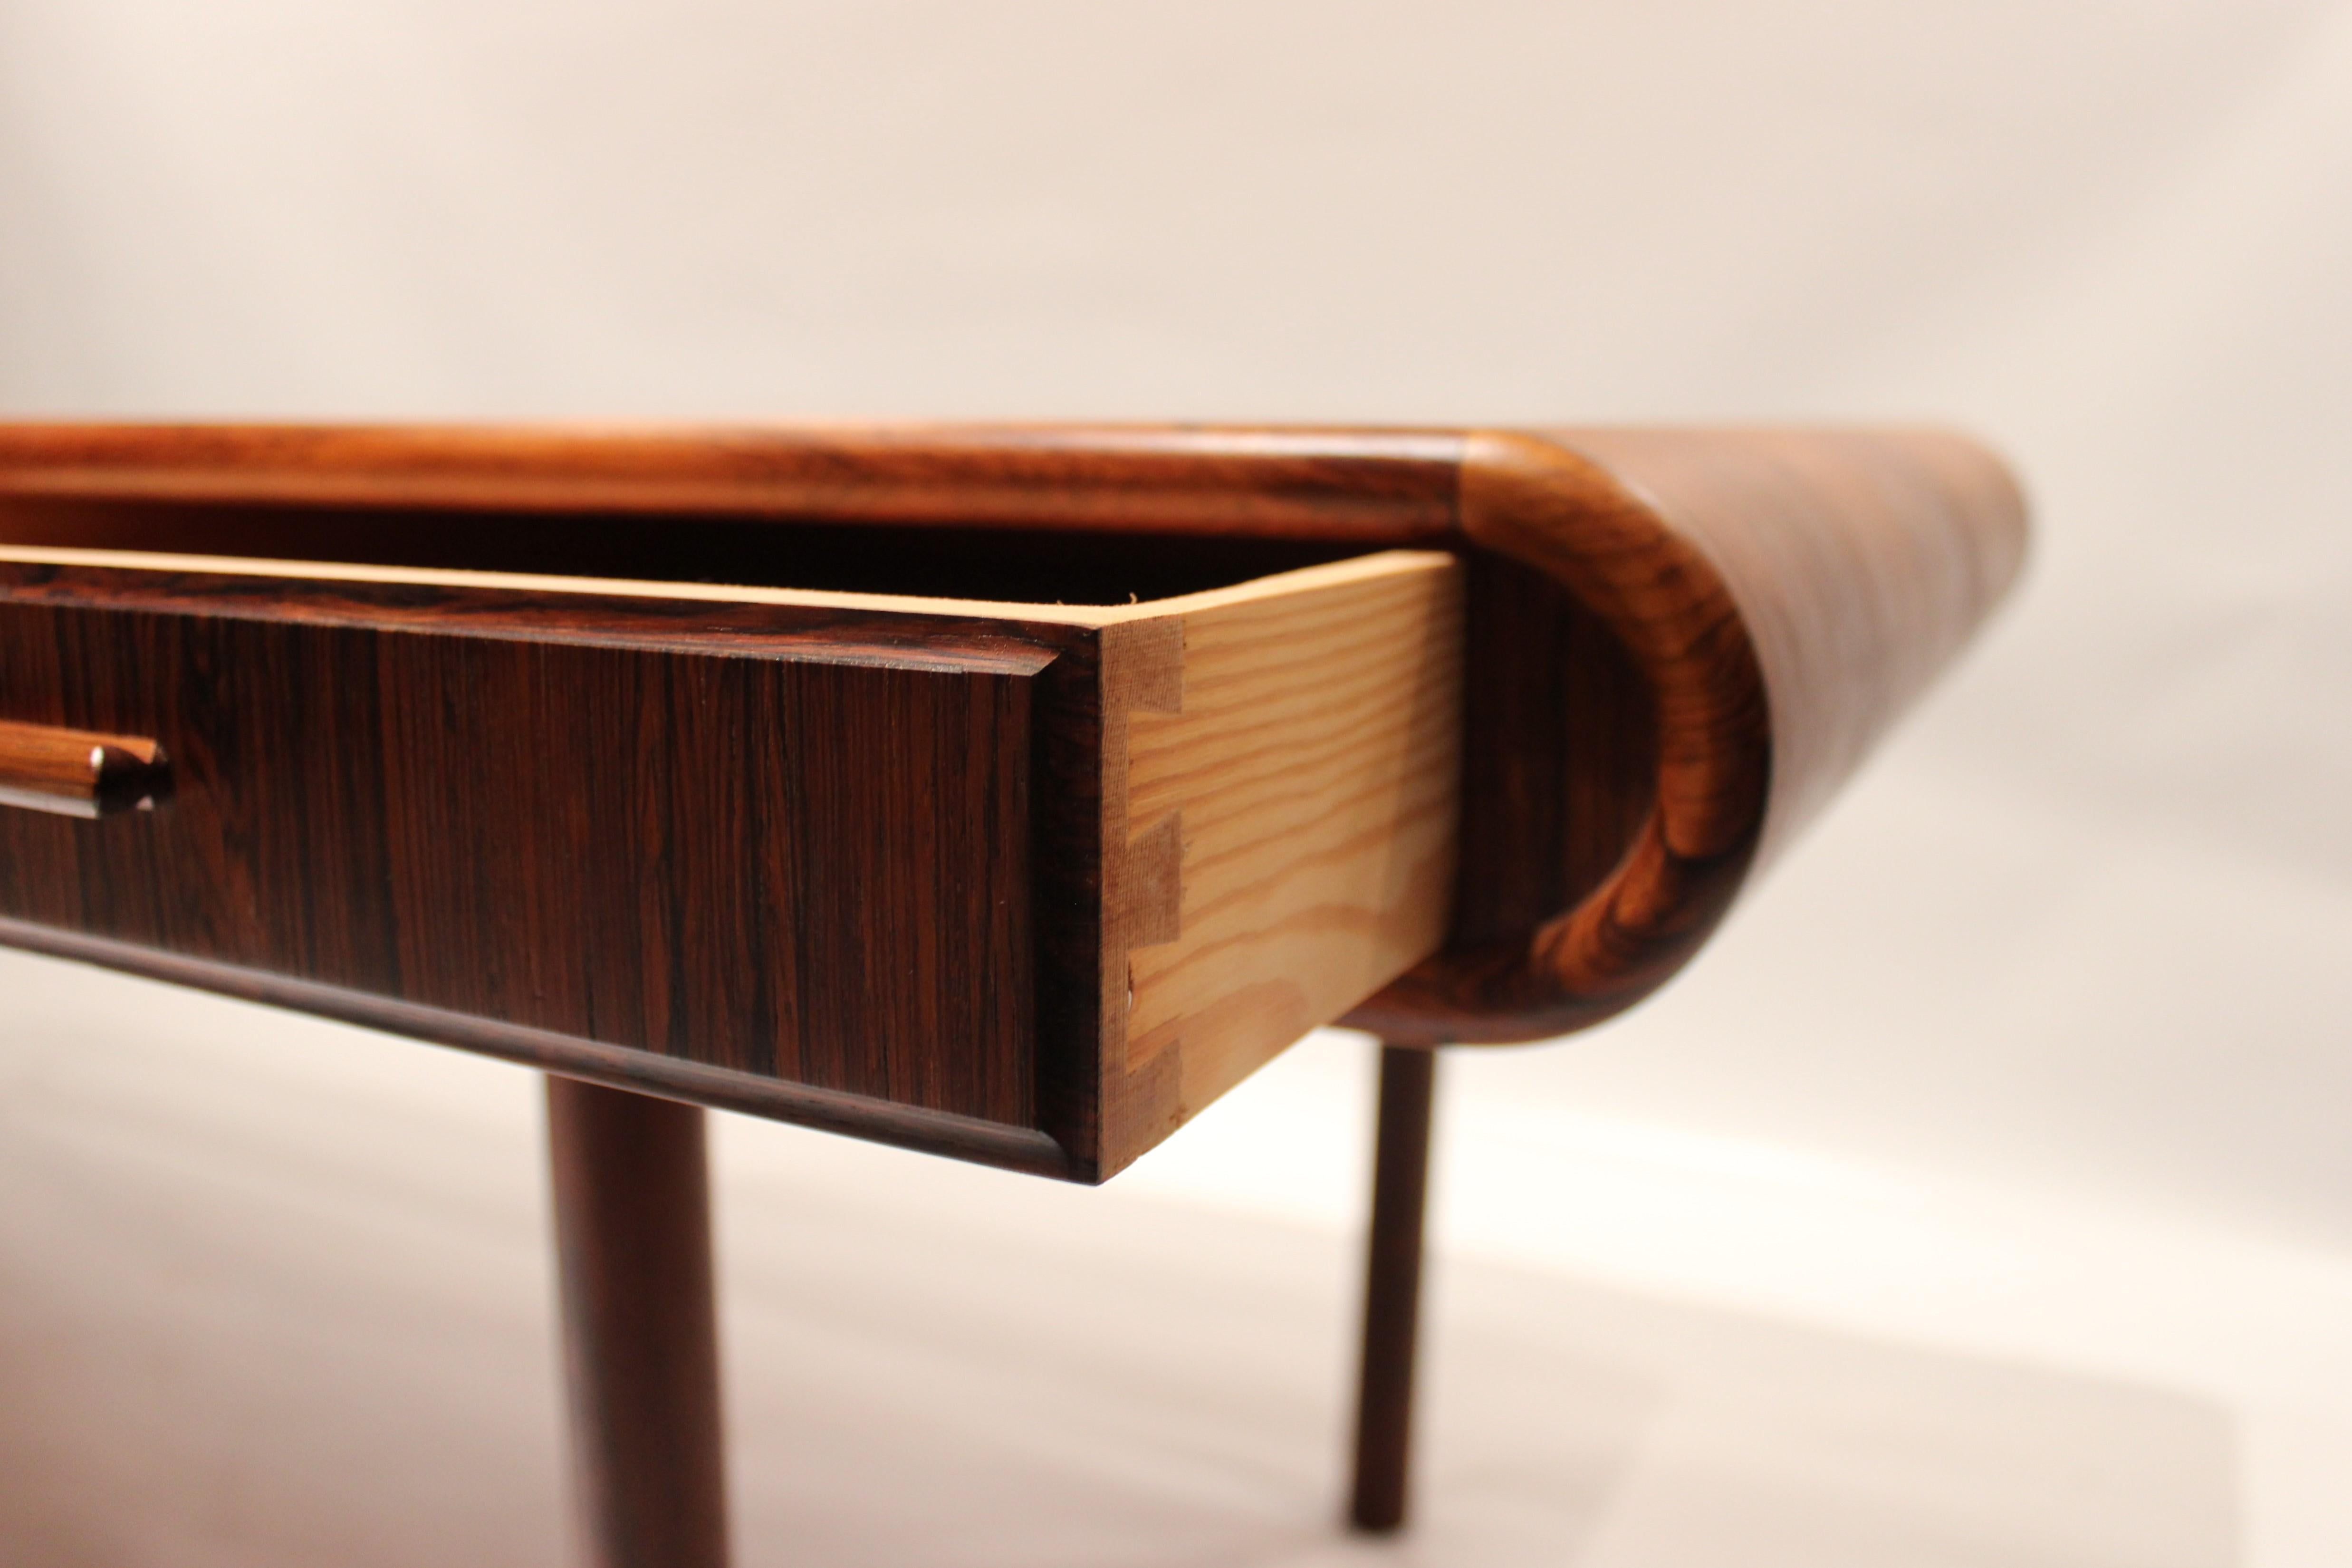 Scandinavian Modern Coffee Table in Rosewood with Curved Edges of Danish Design from the 1960s